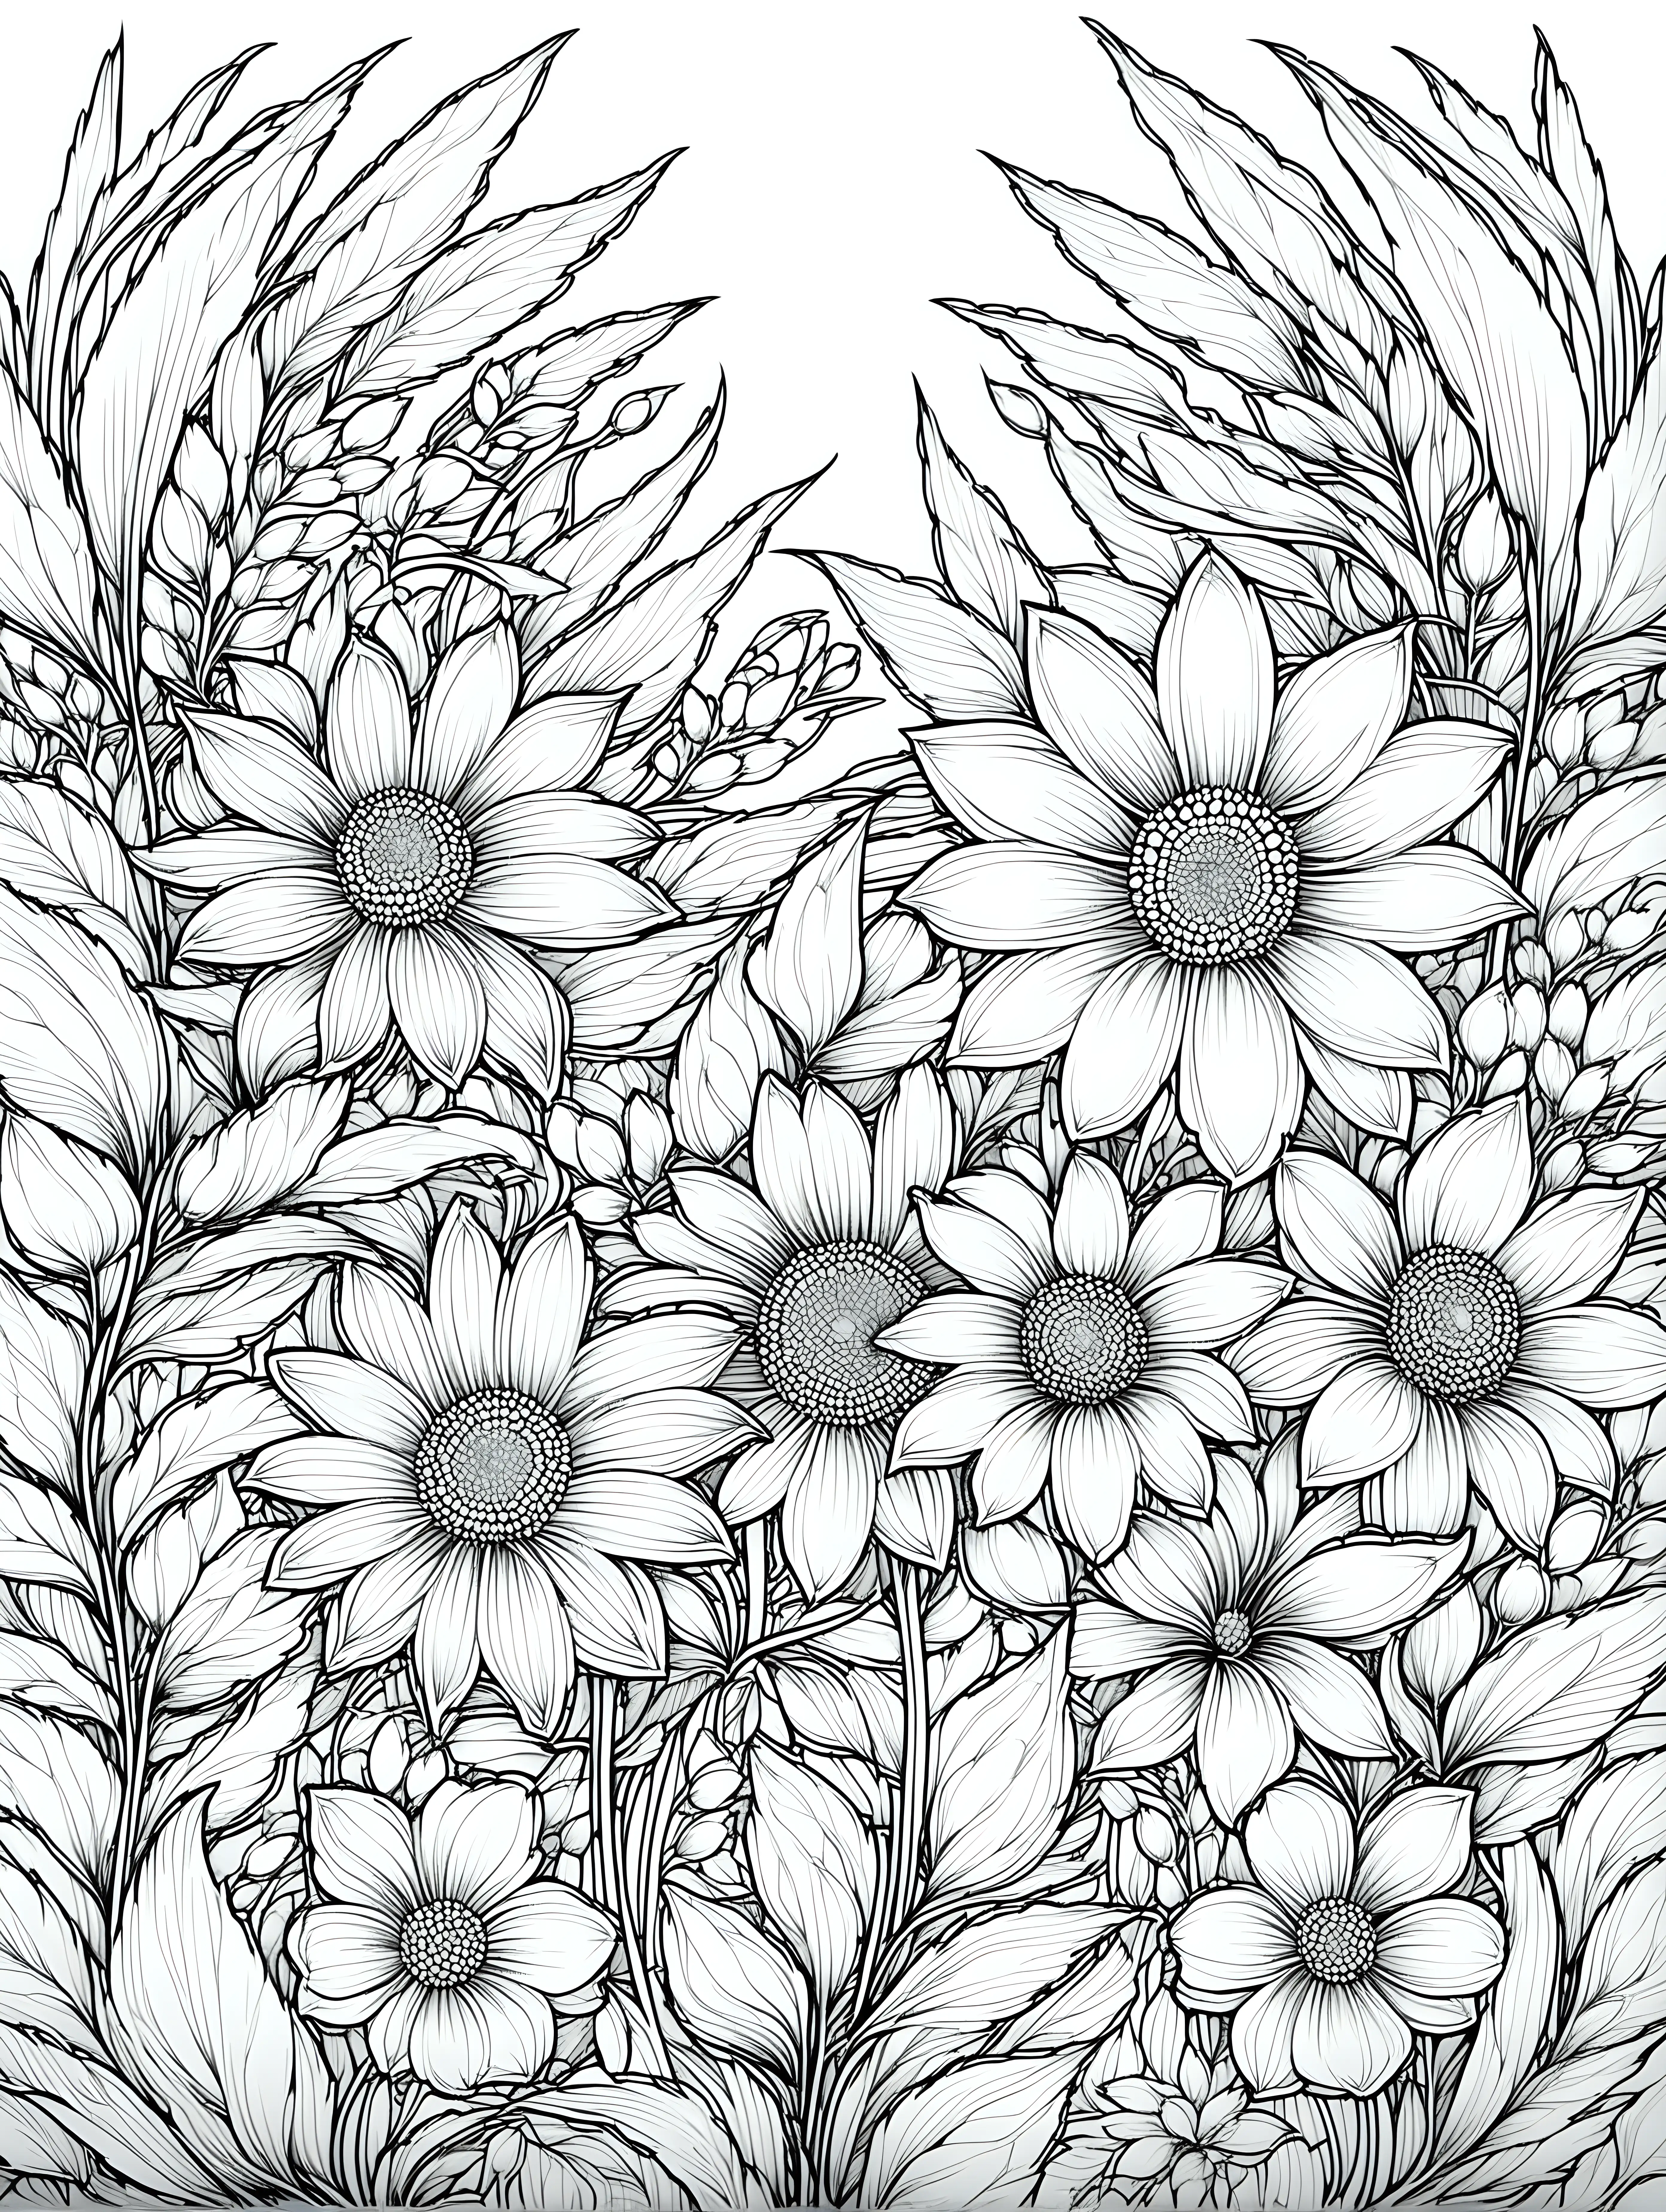 Beautiful black and white fantasy flowers composition for coloring page, thin lines, minimum details, no greys